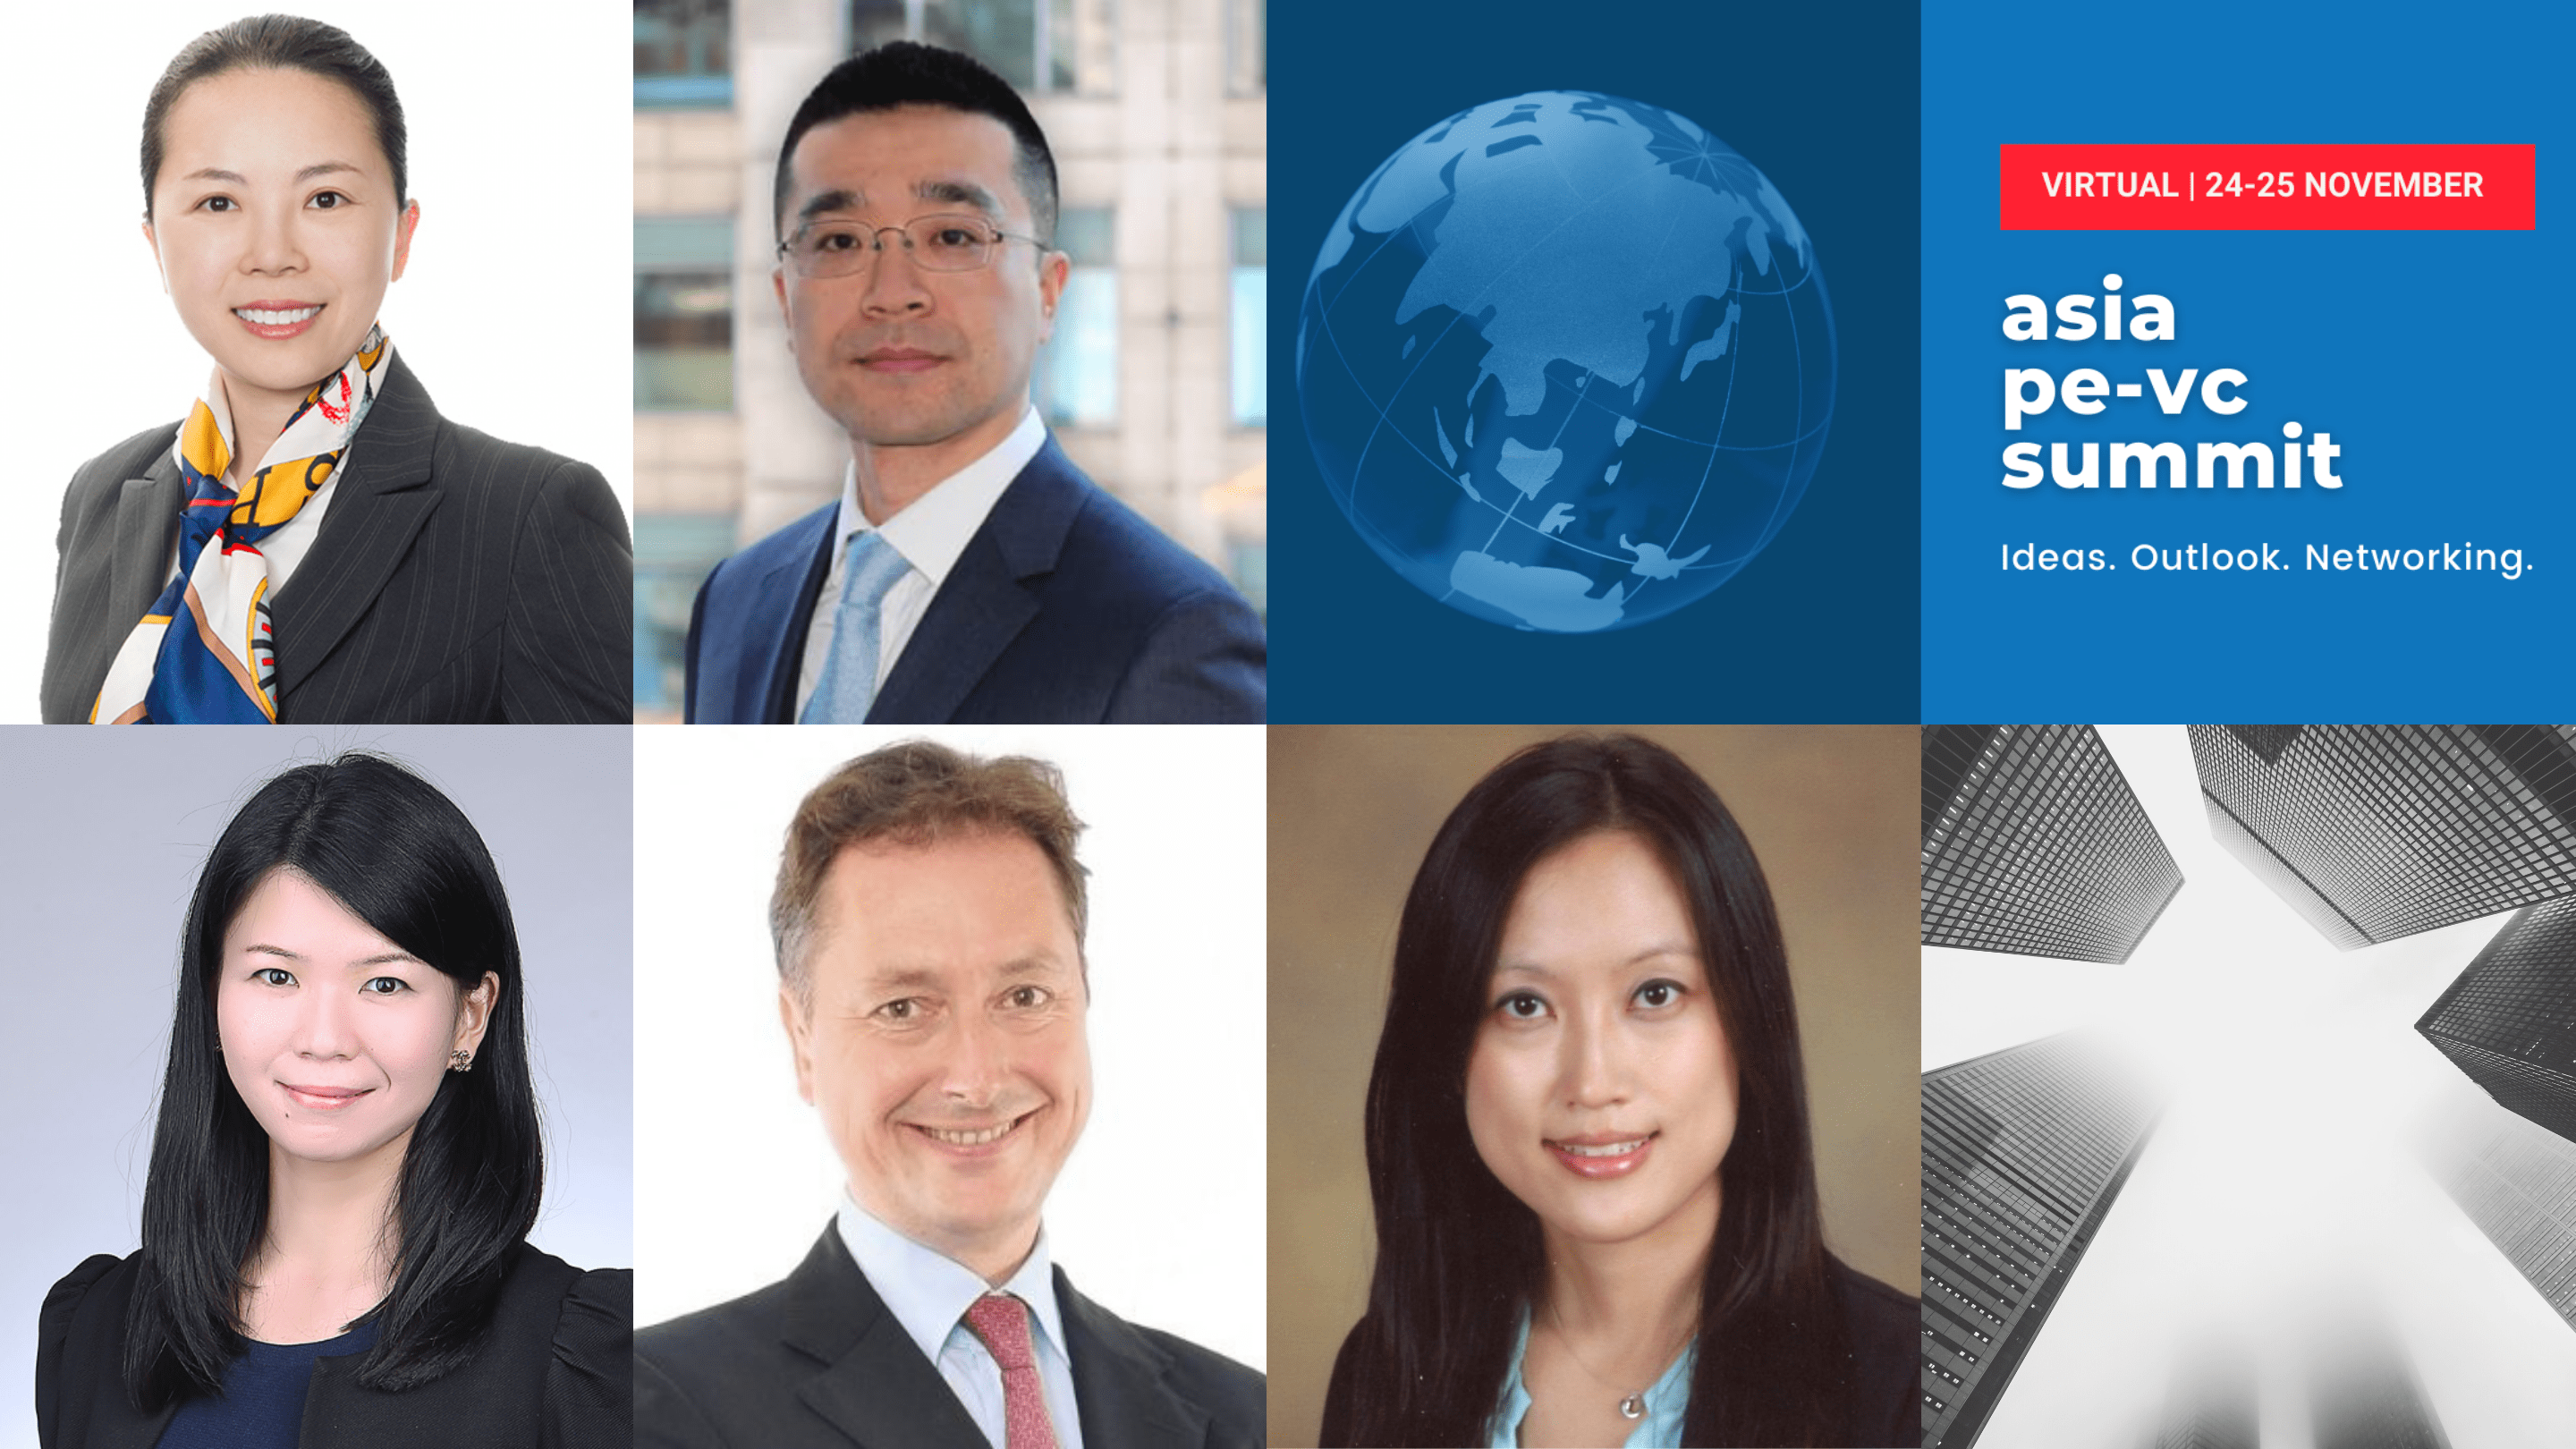 Get LP perspectives on outlook and top themes at Asia PE-VC Summit 2020